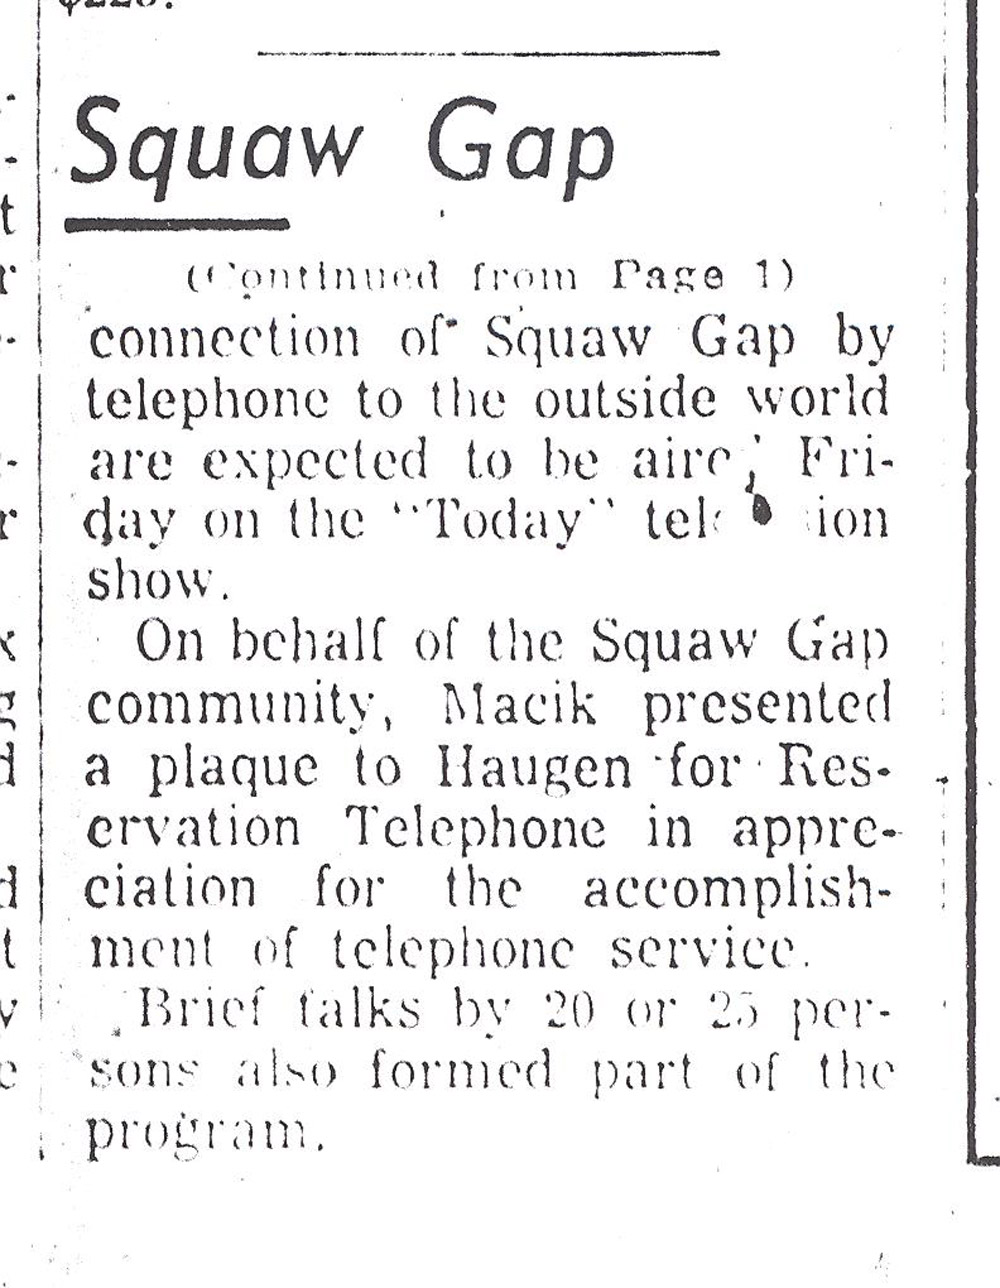 Squaw Gap. The Minot Daily News reported on the opening of the Reservation Telephone Co-op line for Squaw Gap on December 15, 1971. It was the first time that the ranching community of Squaw Gap had telephone service. The news was reported all over the United States including the NBC-TV Today Show and a front page article in the Wall Street Journal. The residents of Squaw Gap were simply happy to have telephone service.